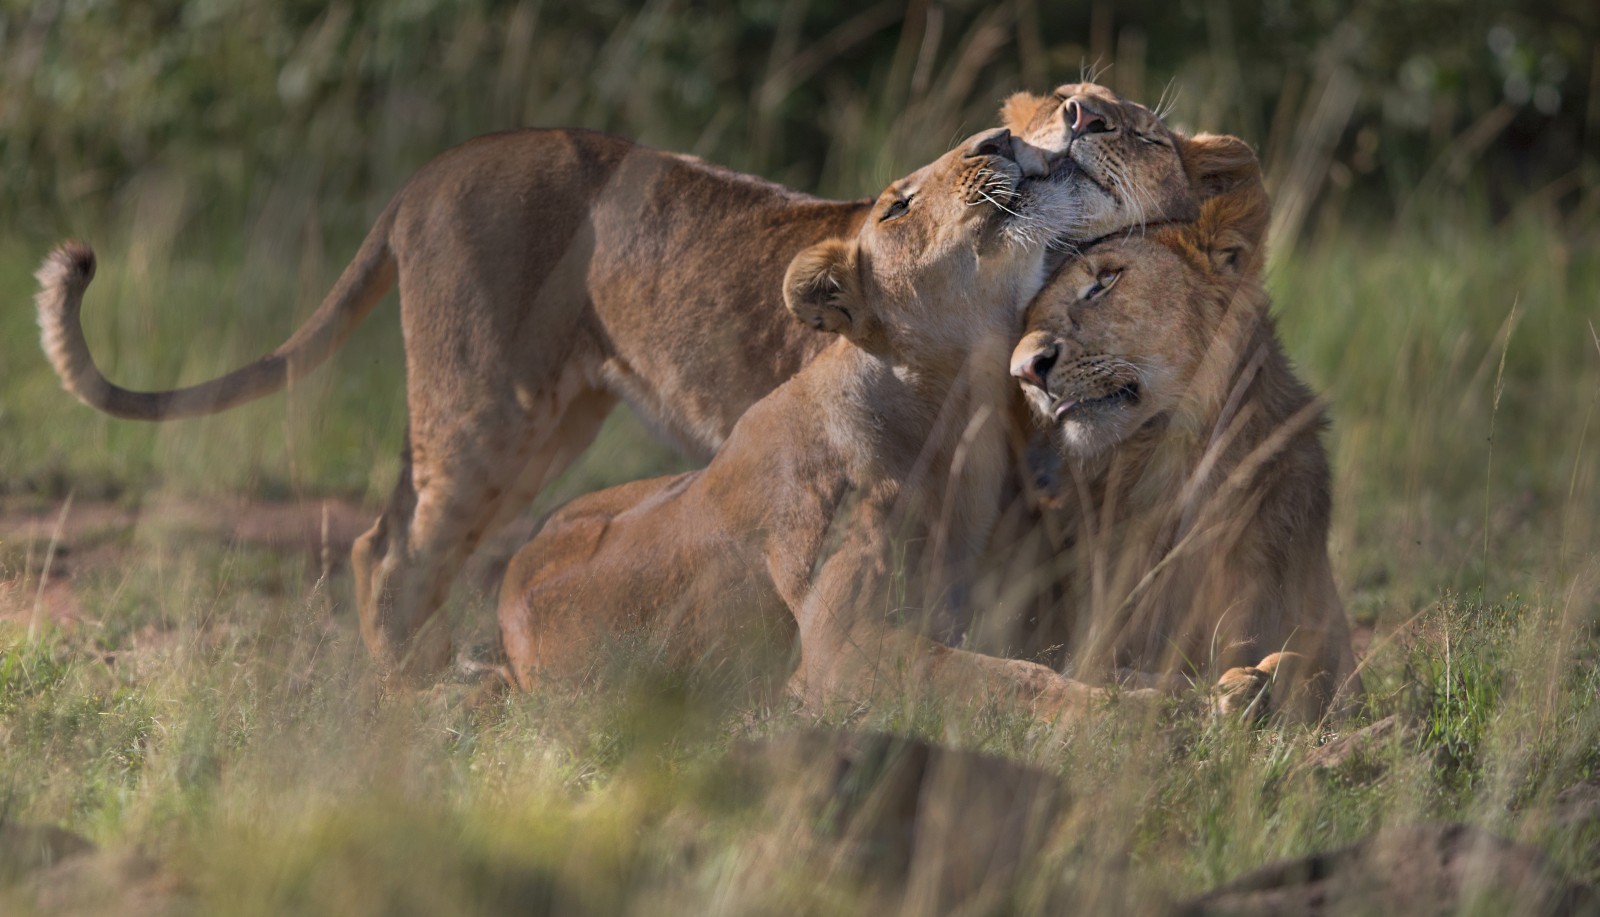 A photo of two lionesses snuggling together in the grass